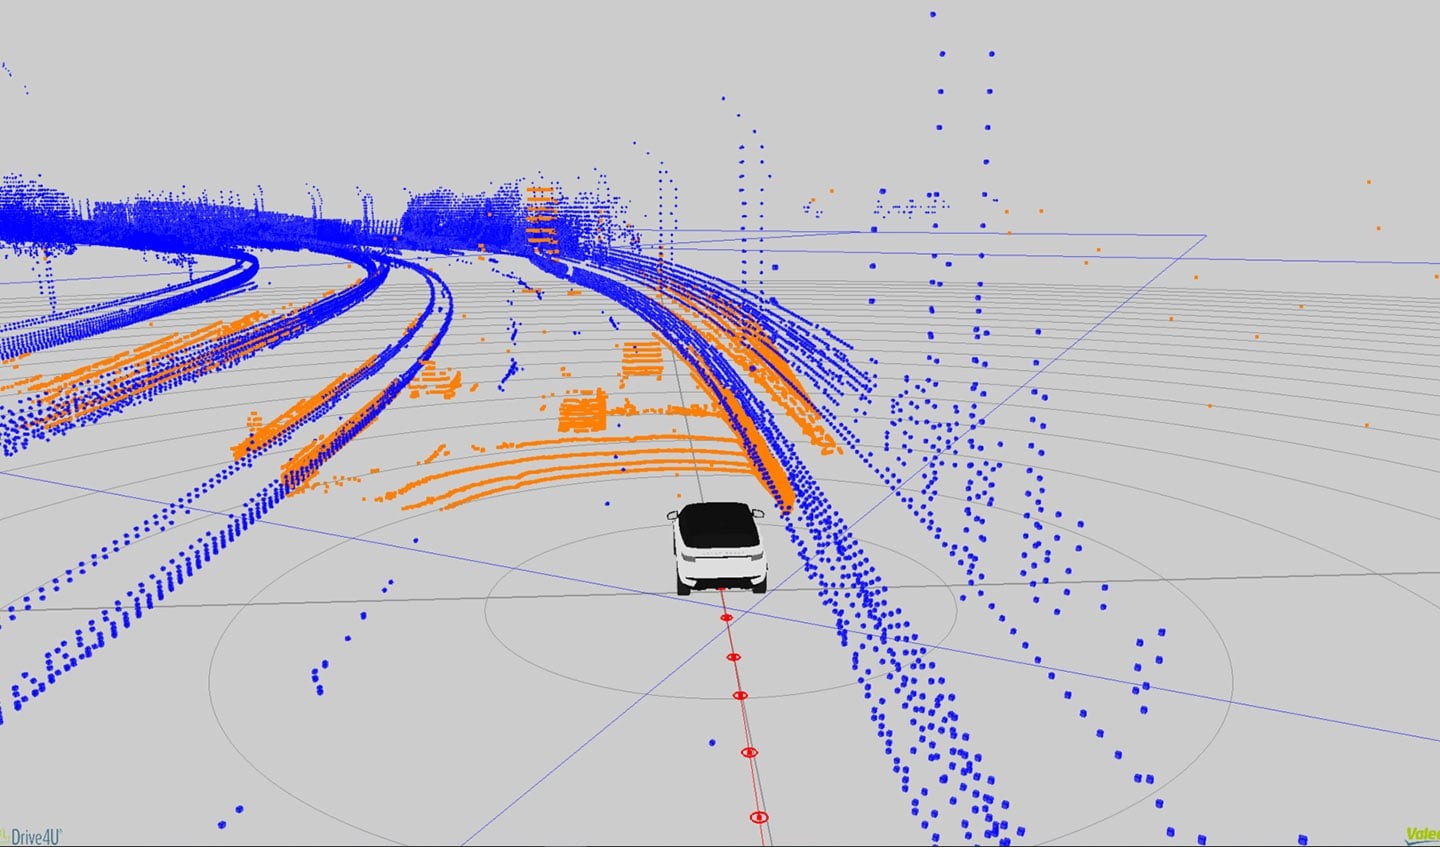 Valeo sensor data (orange) combined with TomTom HD Map and RoadDNA data (blue) gives centimeter-accurate positioning (red)